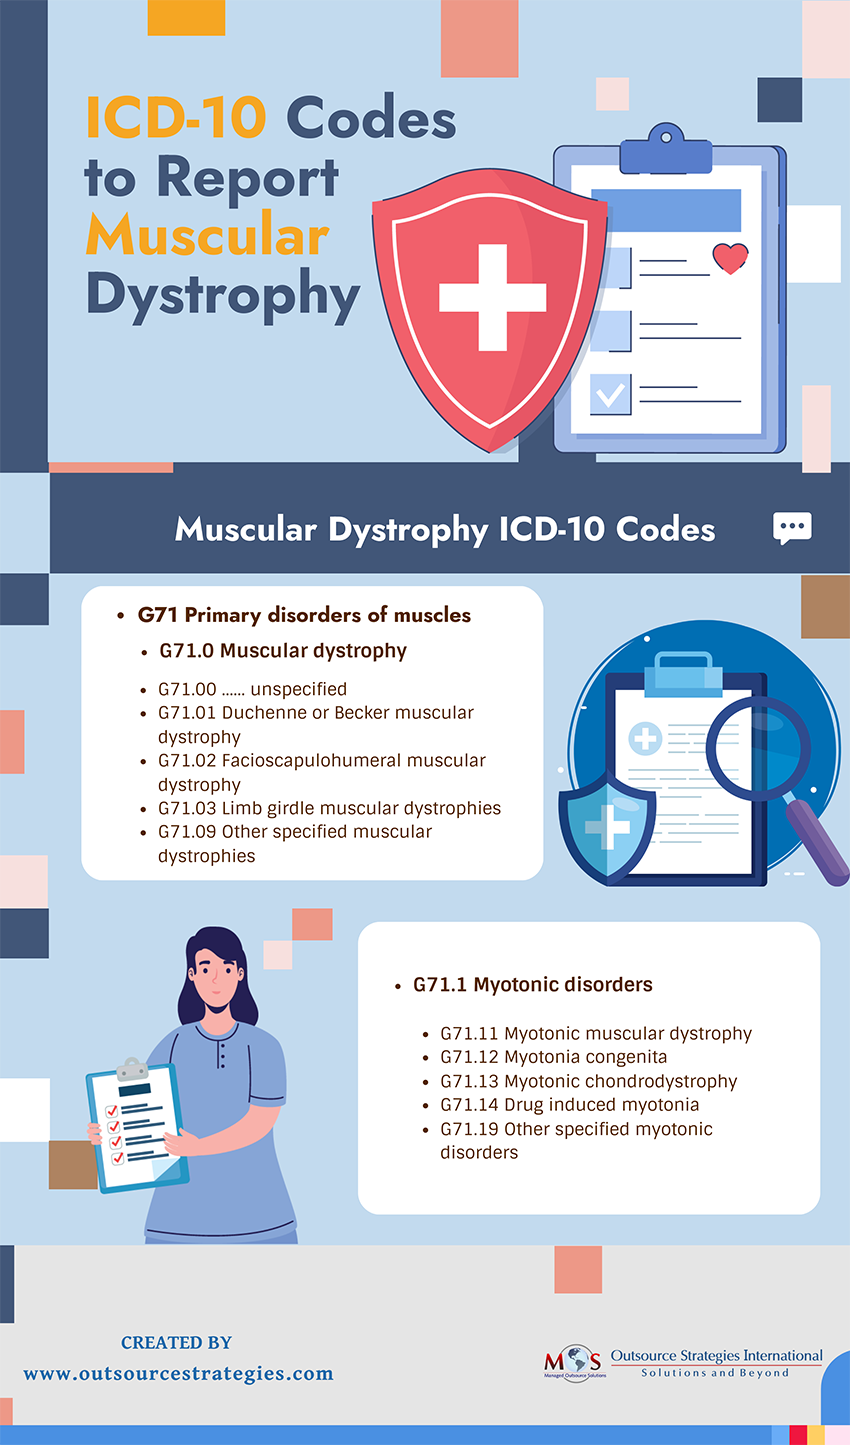 Codes to Report Muscular Dystrophy